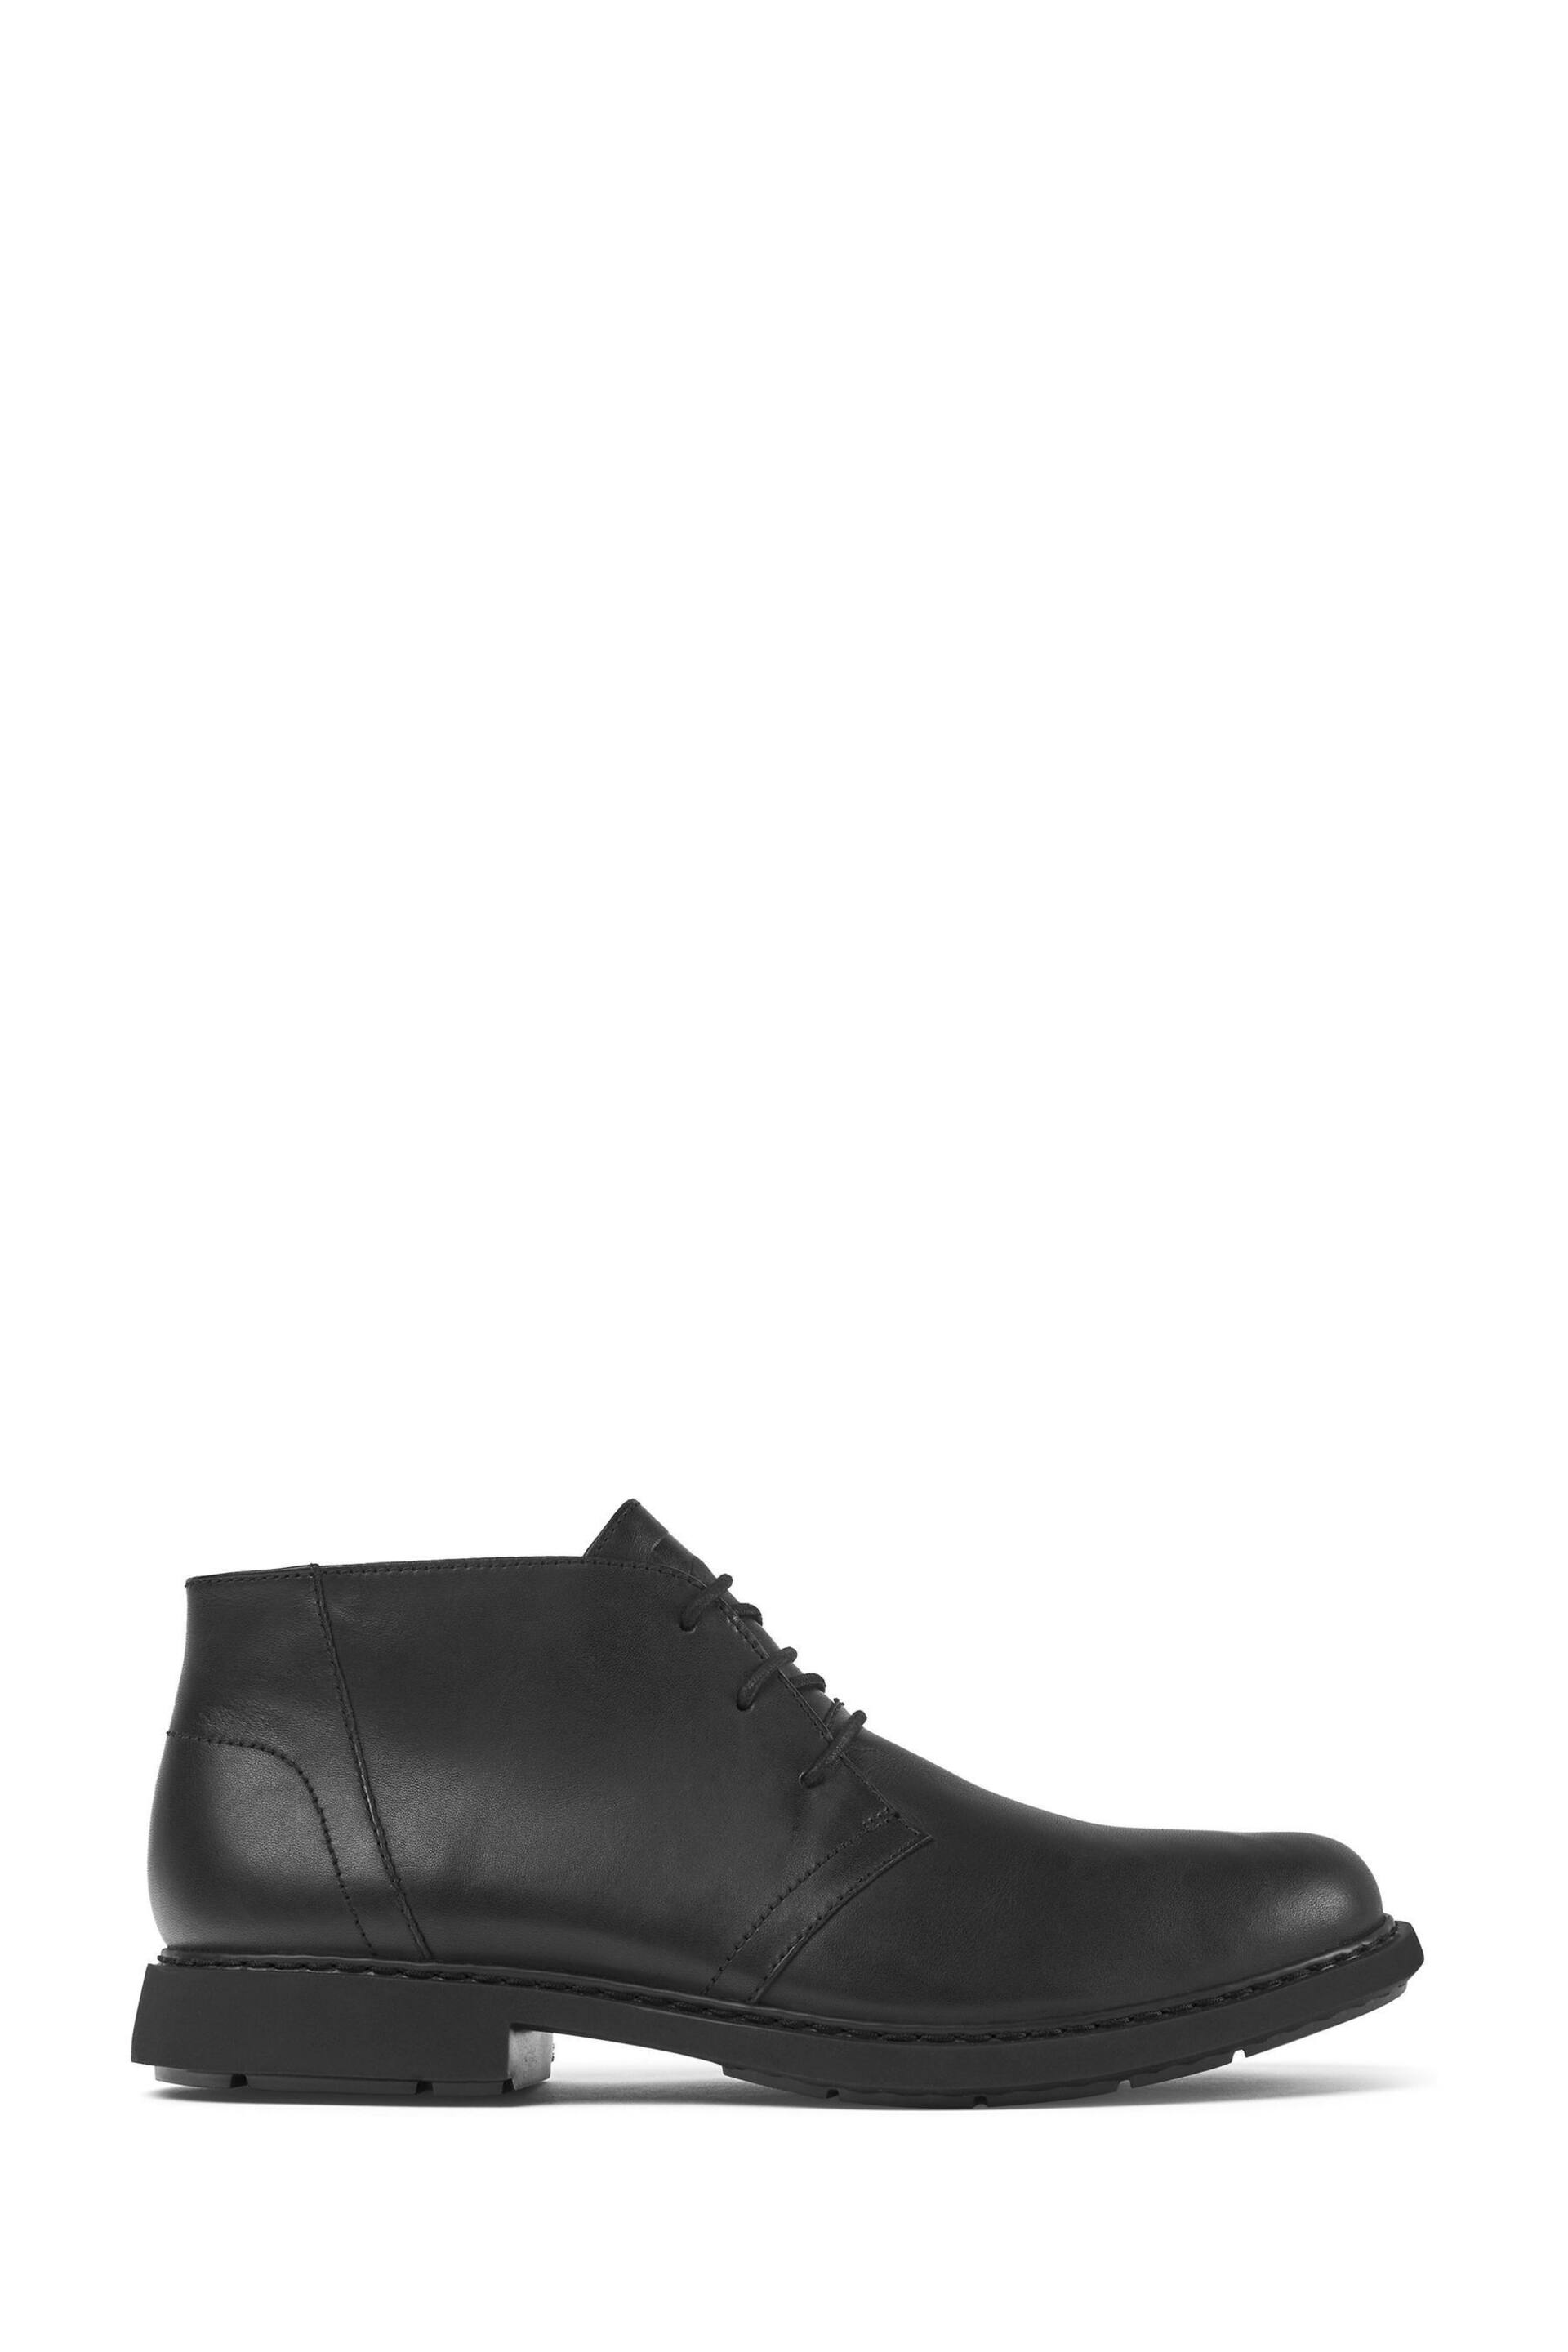 Camper Mens Neuman Leather Ankle Black Boots - Image 1 of 5